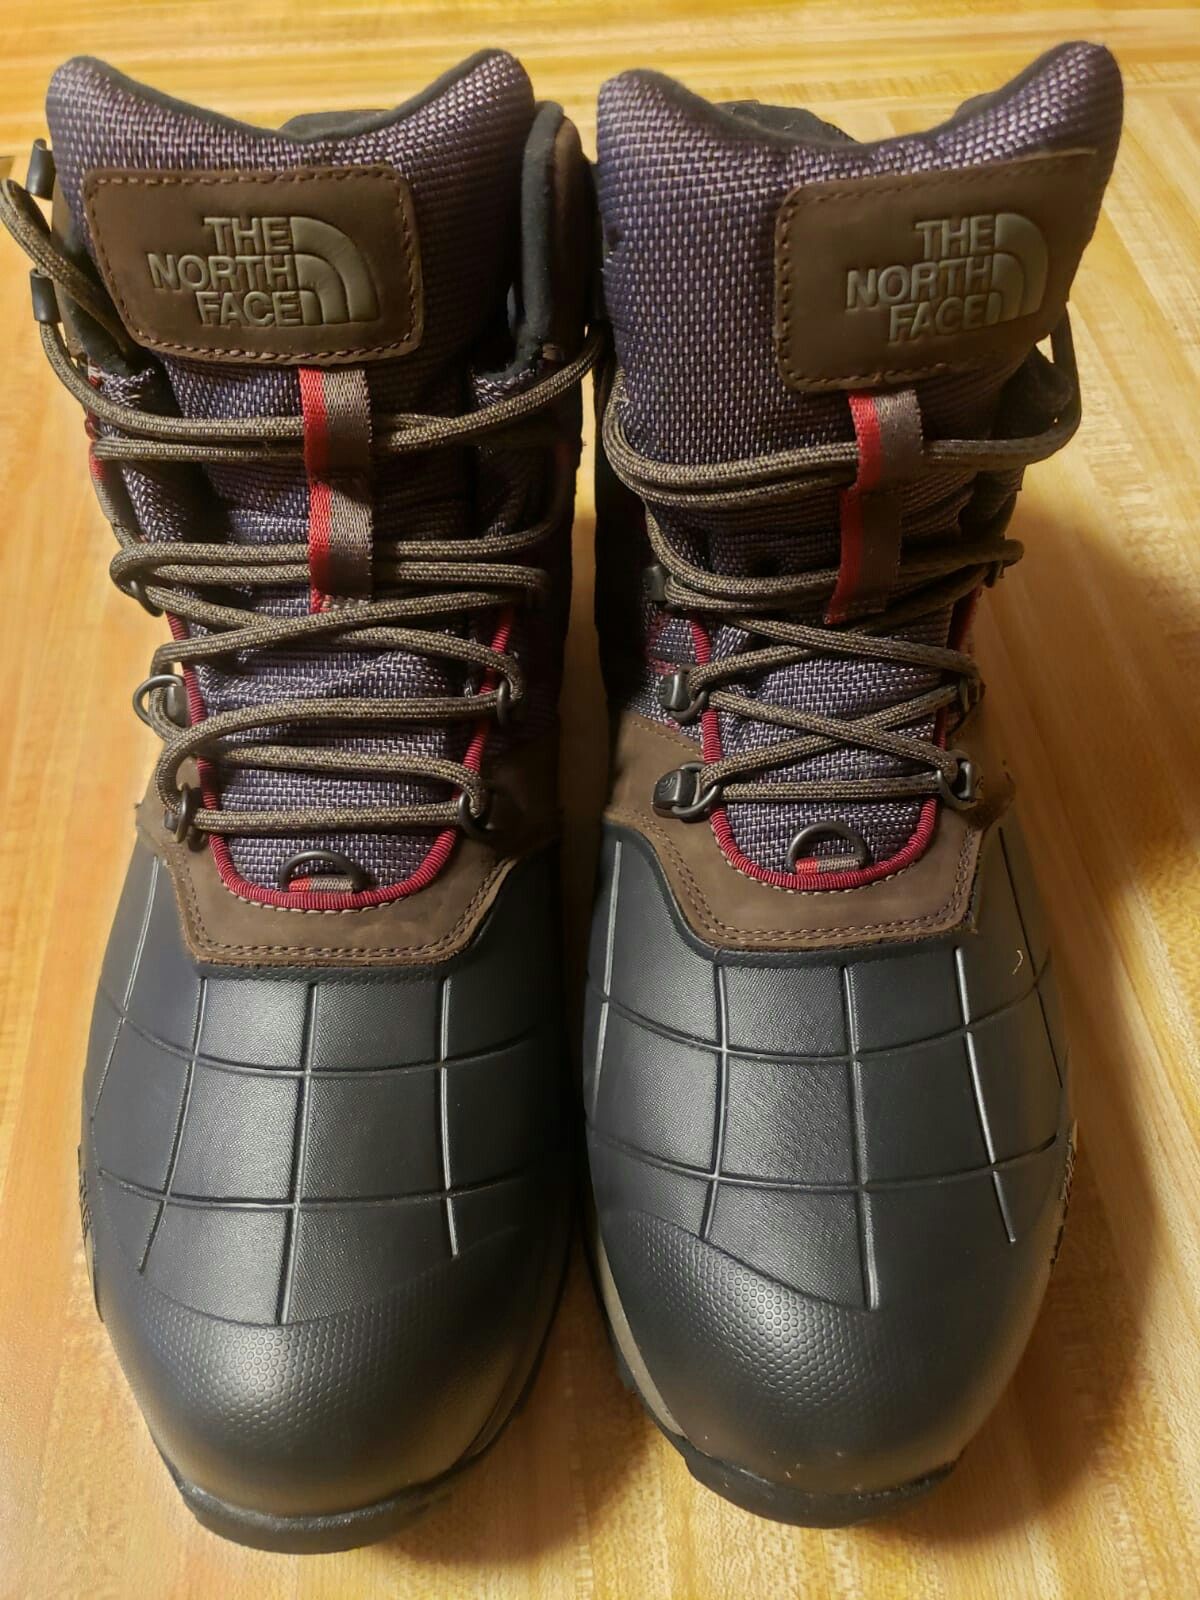 THE NORTH FACE STORM 3